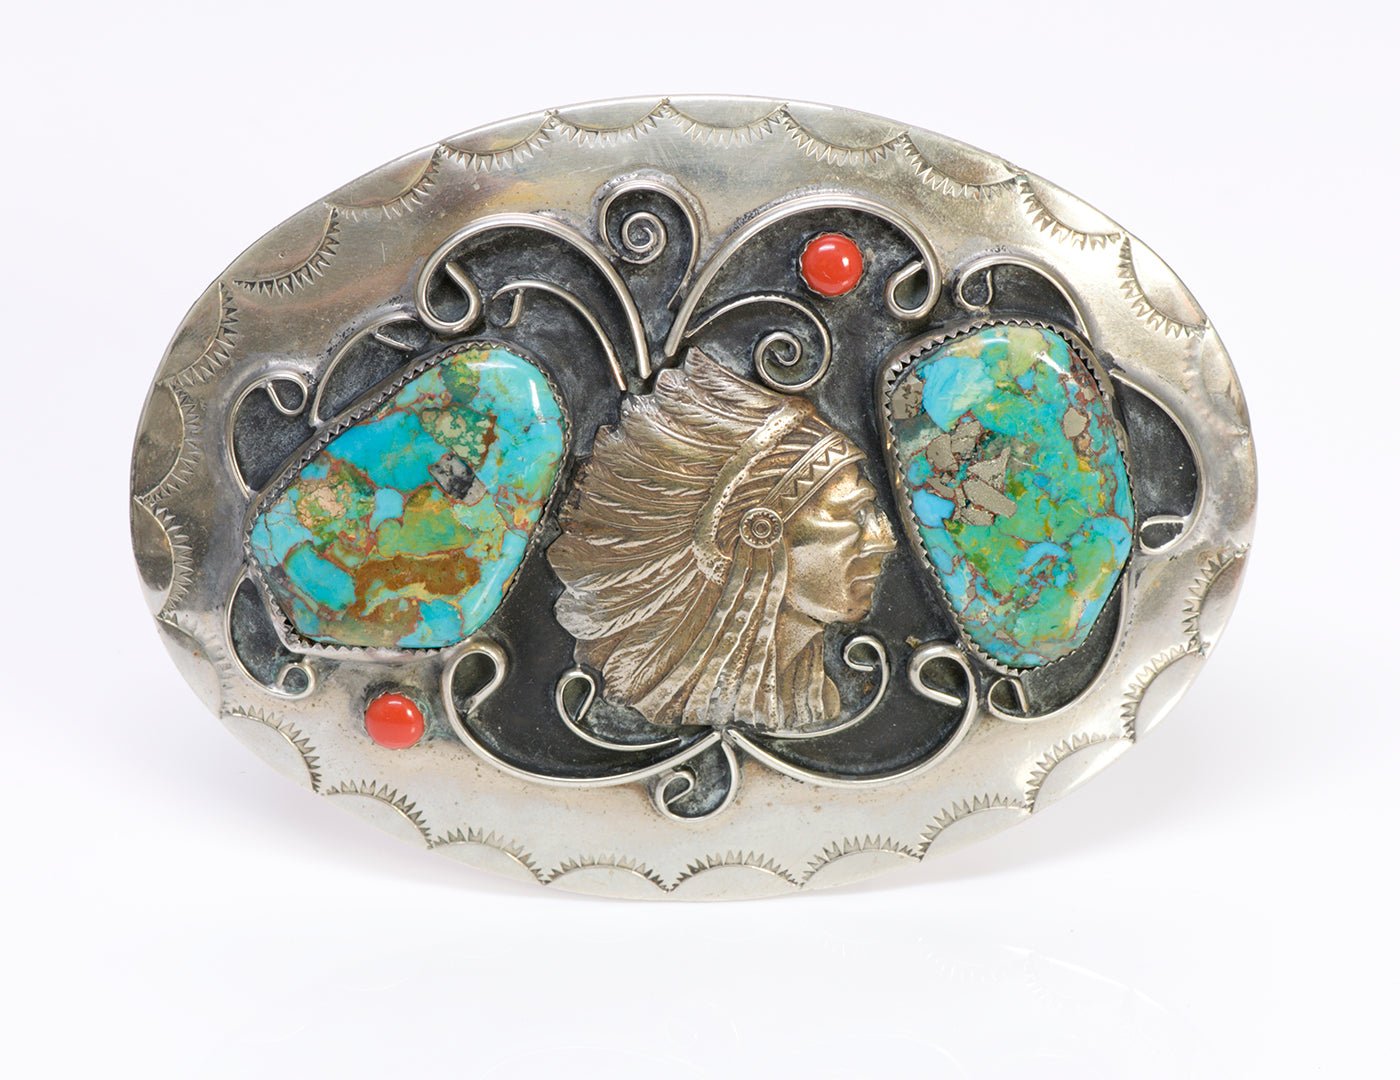 American Indian Chief Turquoise Coral Belt Buckle - DSF Antique Jewelry